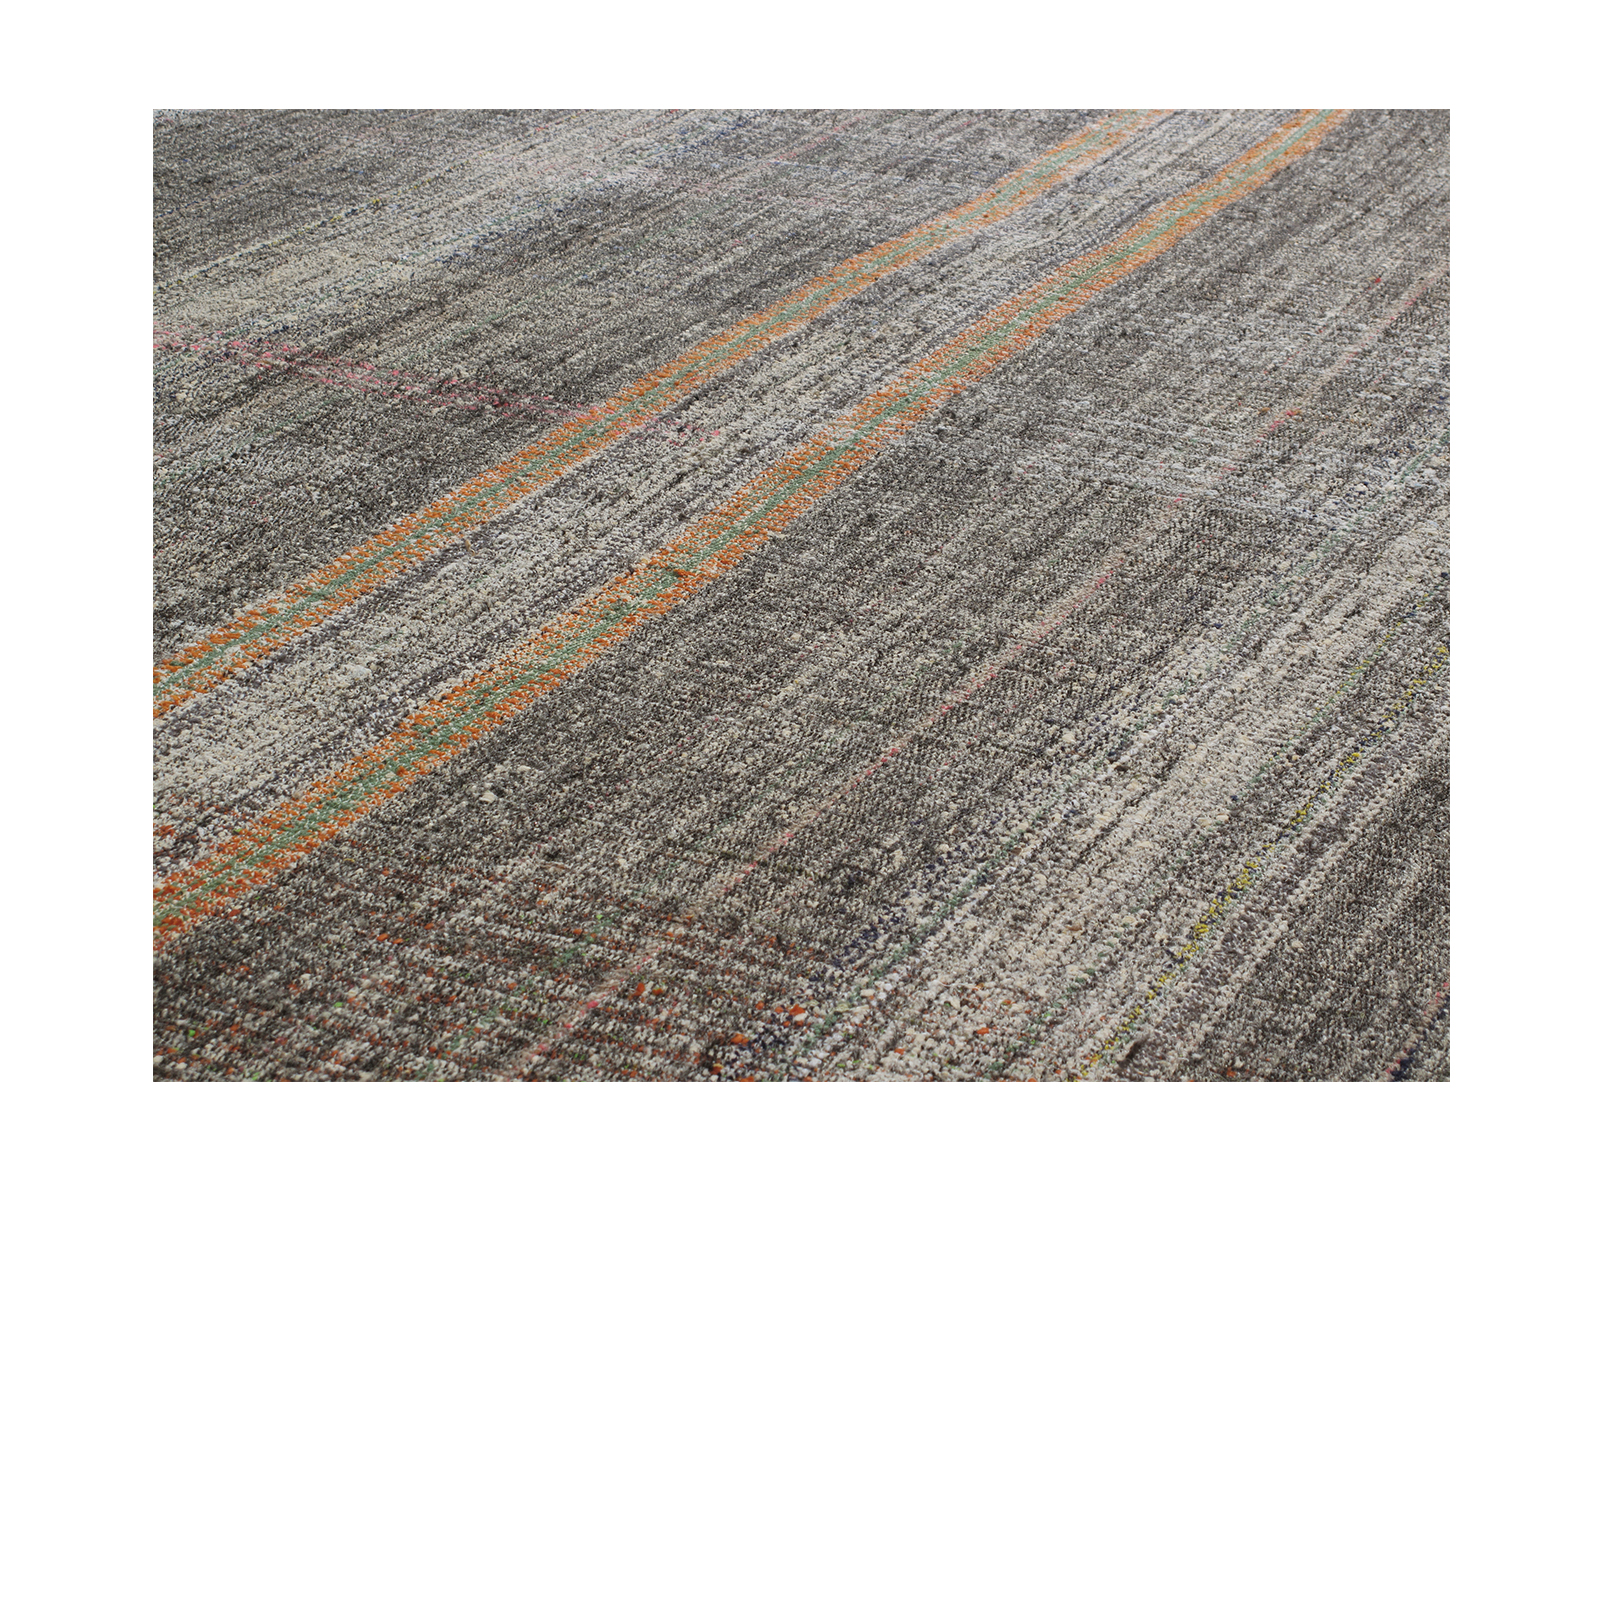 This Vintage flatweave is possess the quality and versatility that stand the test of time.